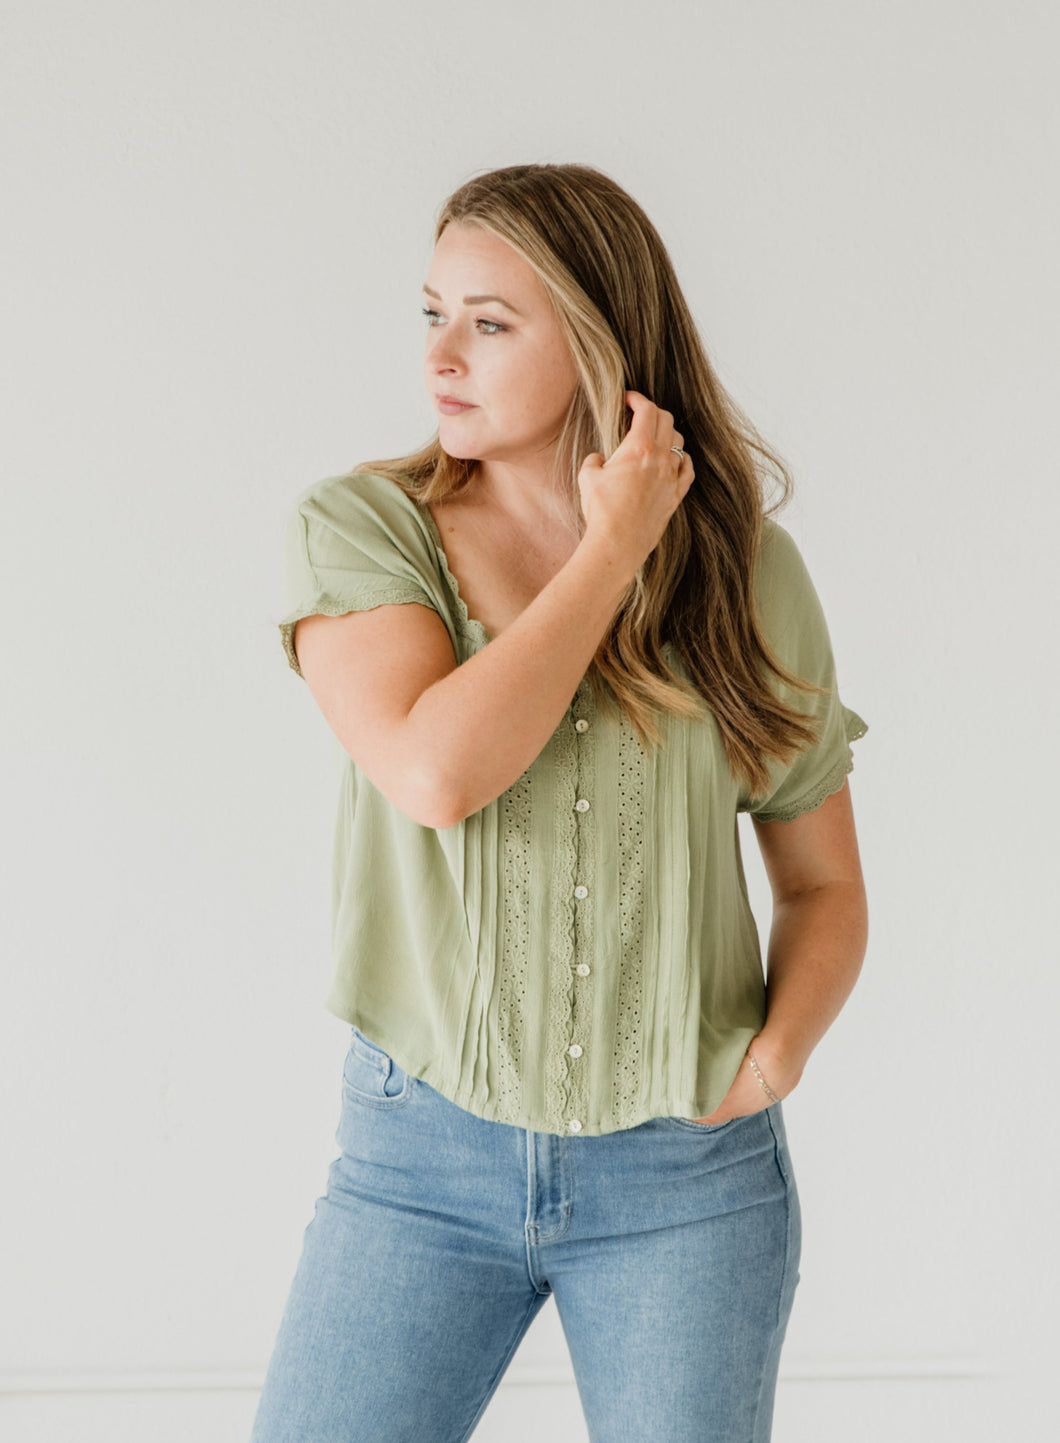 Everly Square Neck Top in Avocado